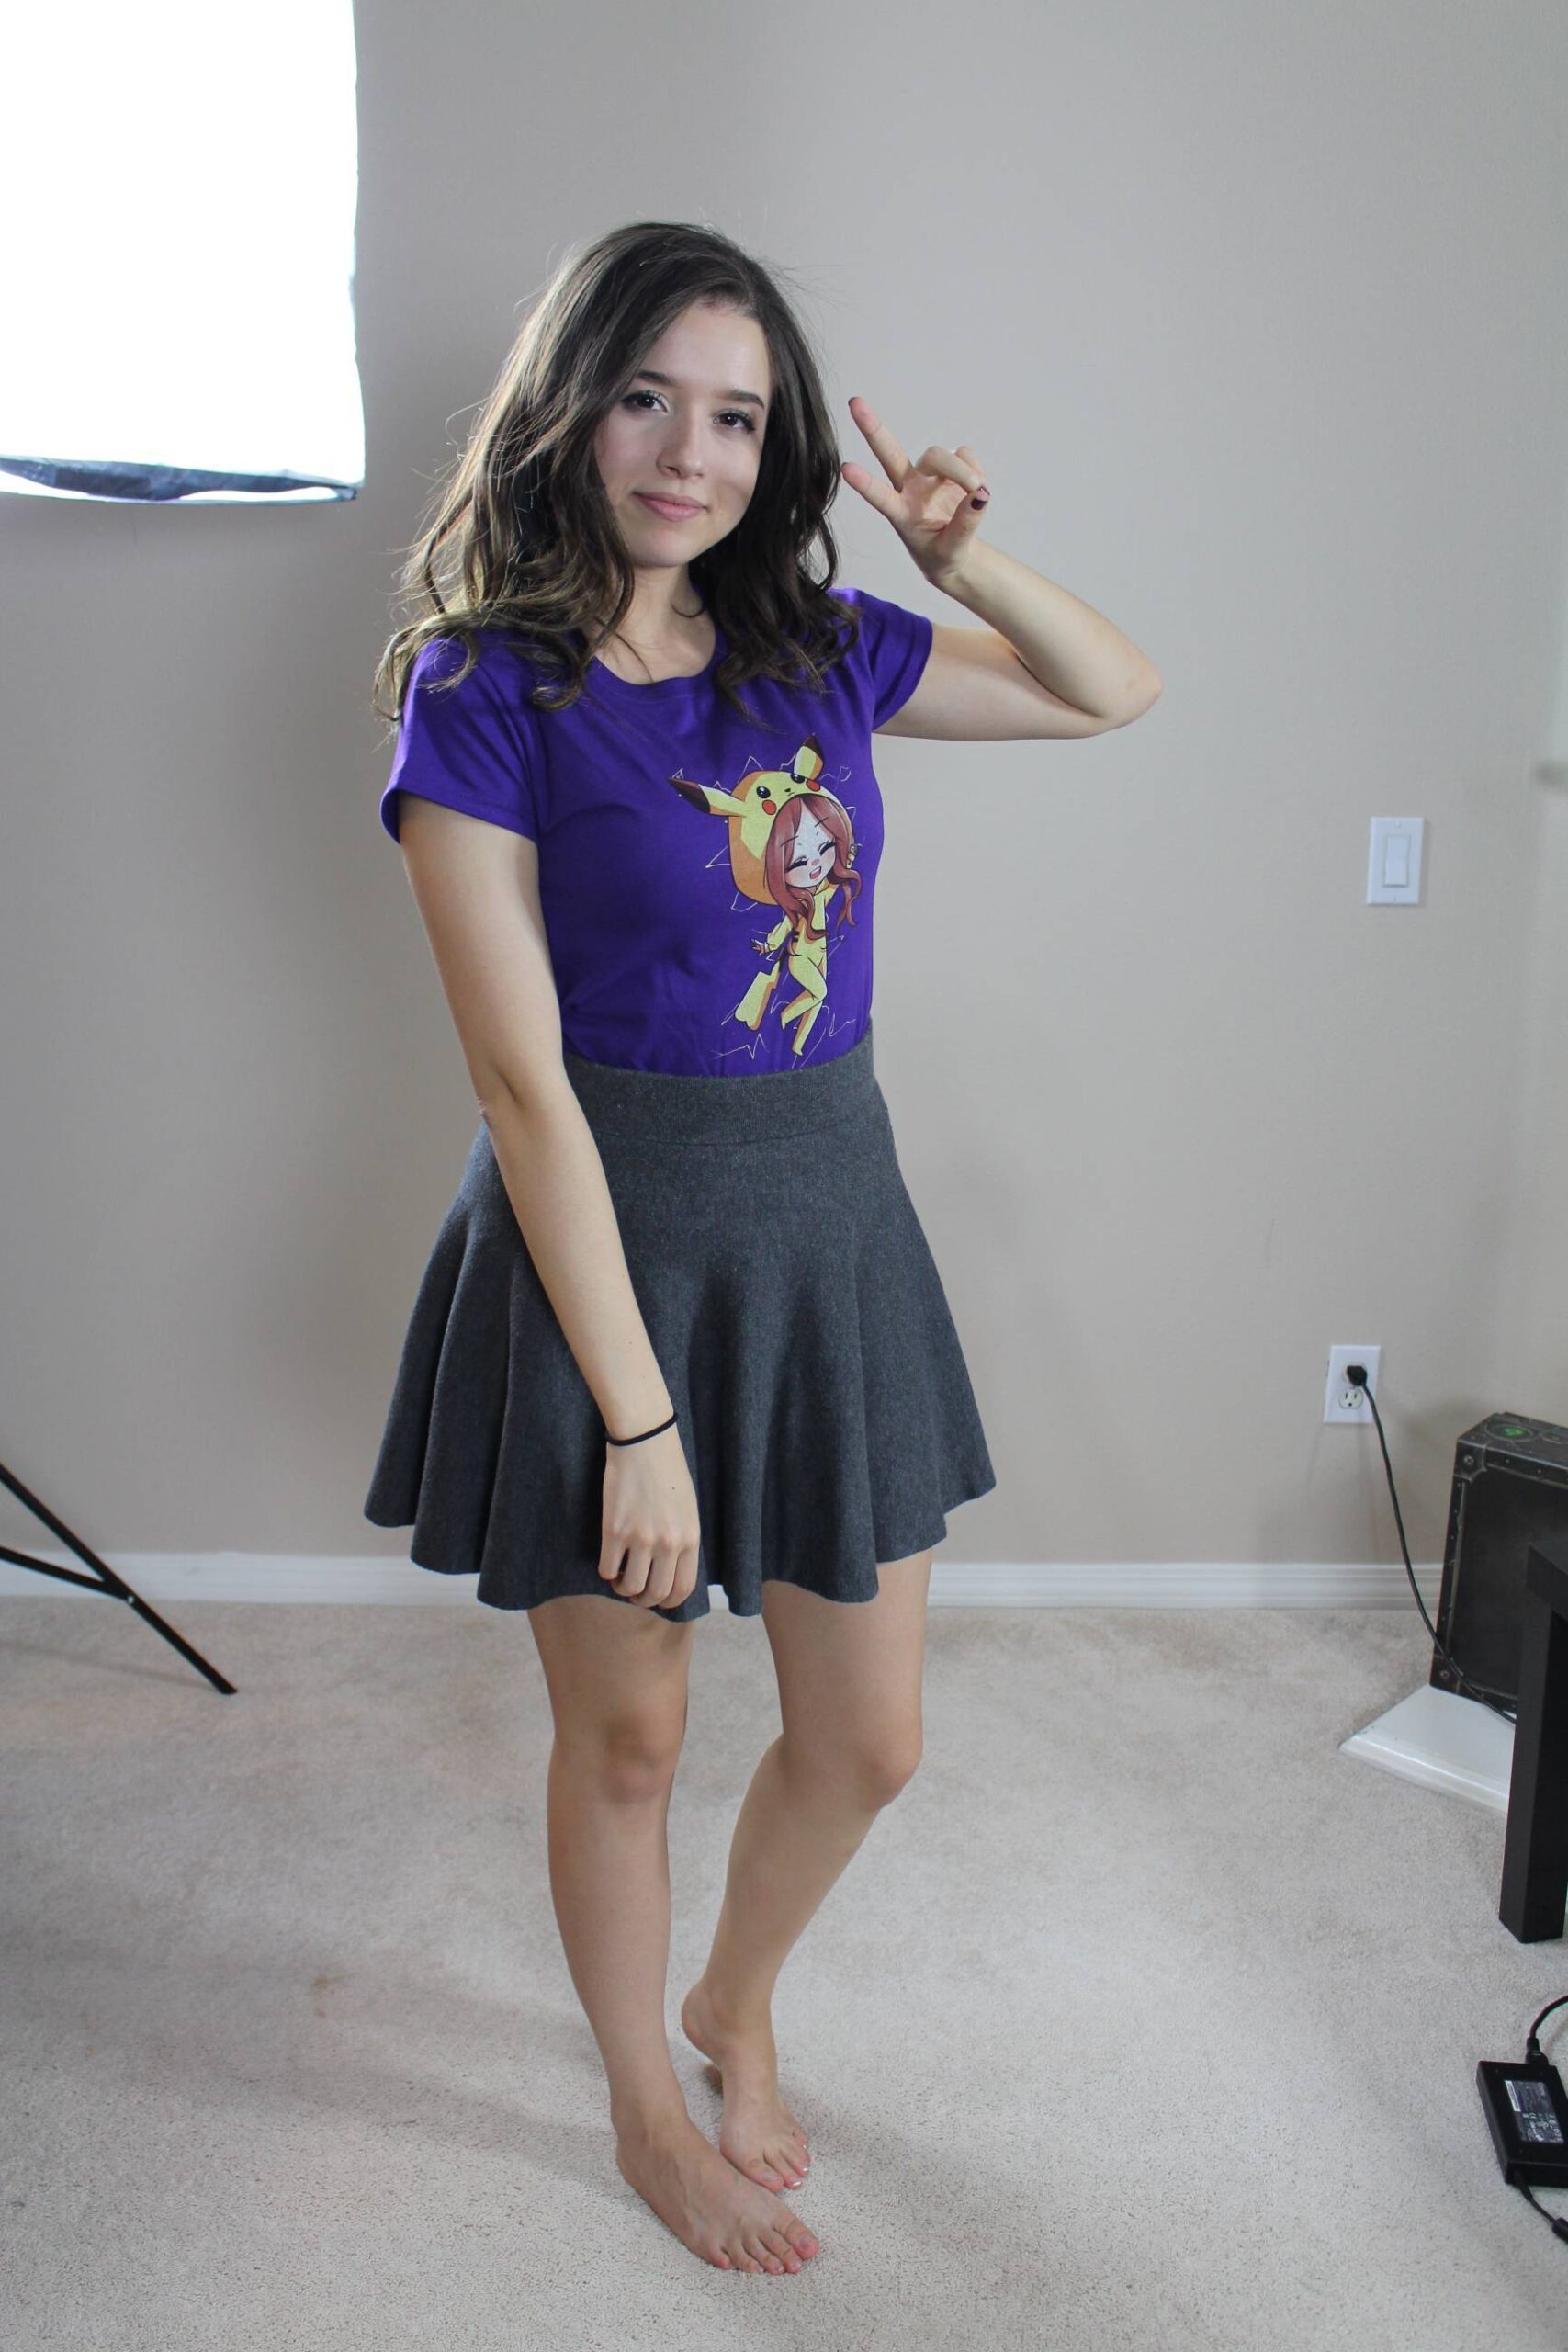 delphine reed recommends pokimane feet pics pic